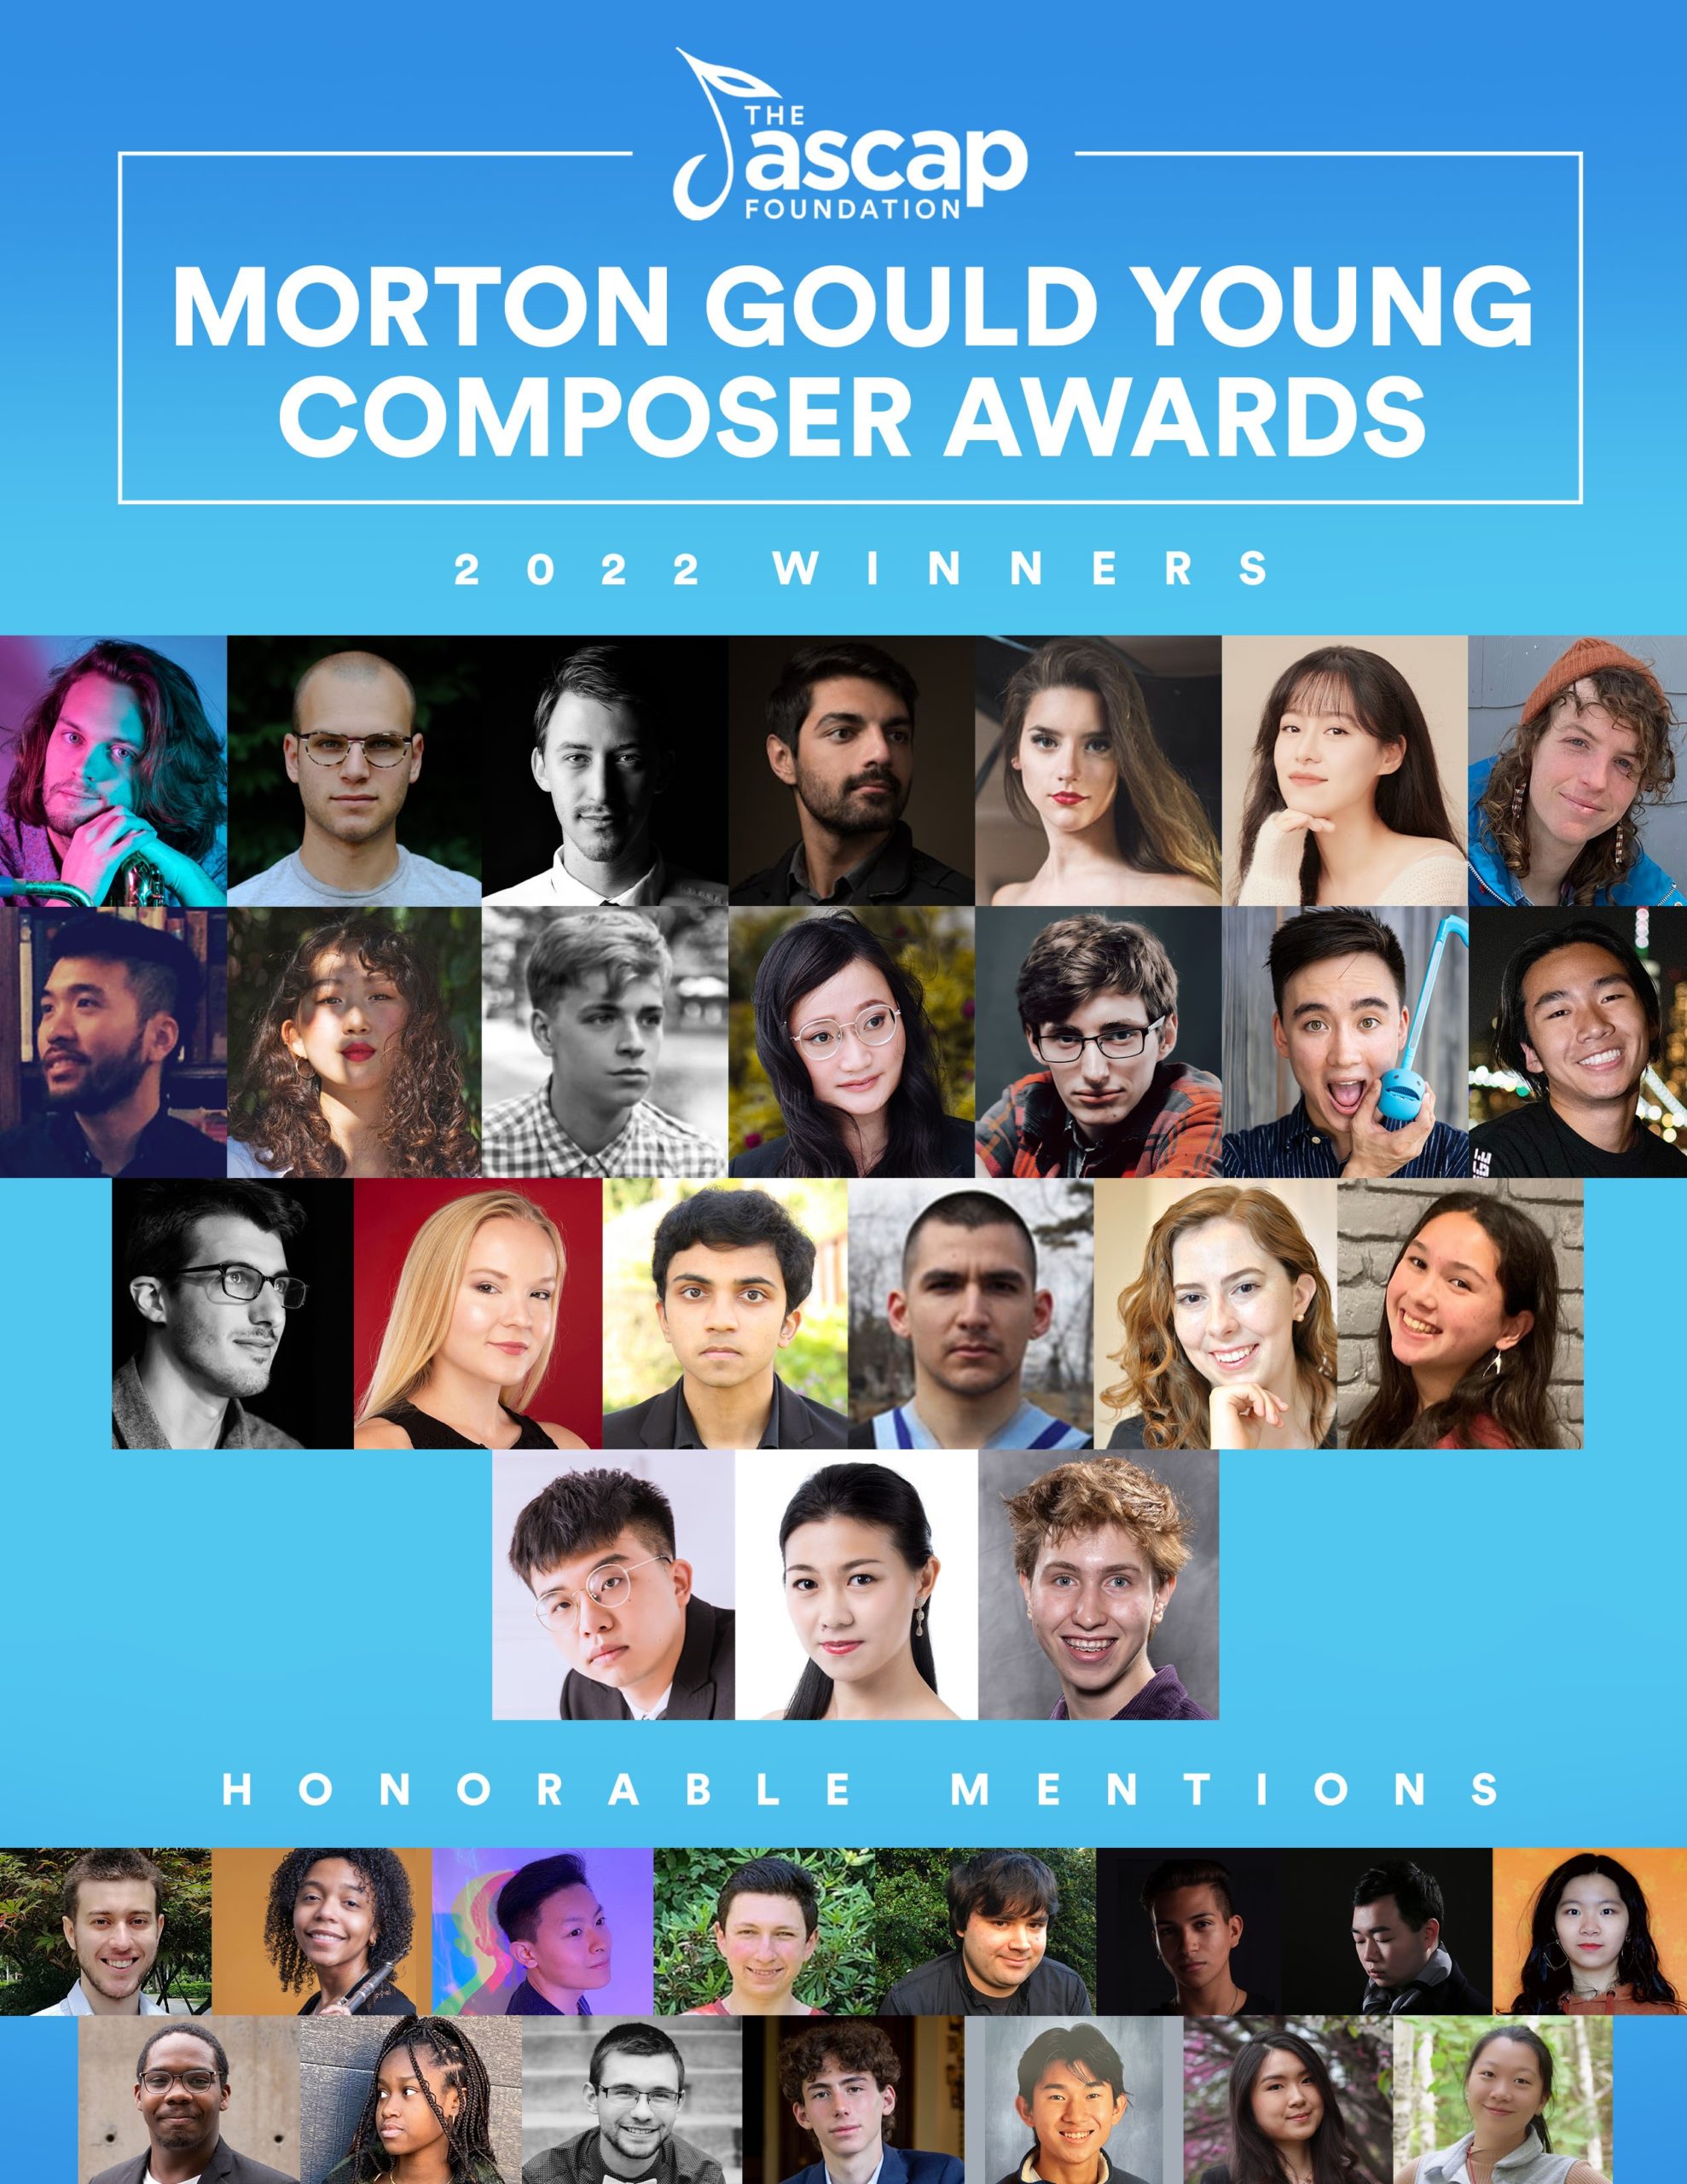 Photos of all the winners and honorable mentions in the 2022 ASCAP Foundation Morton Gould Young Composer Awards